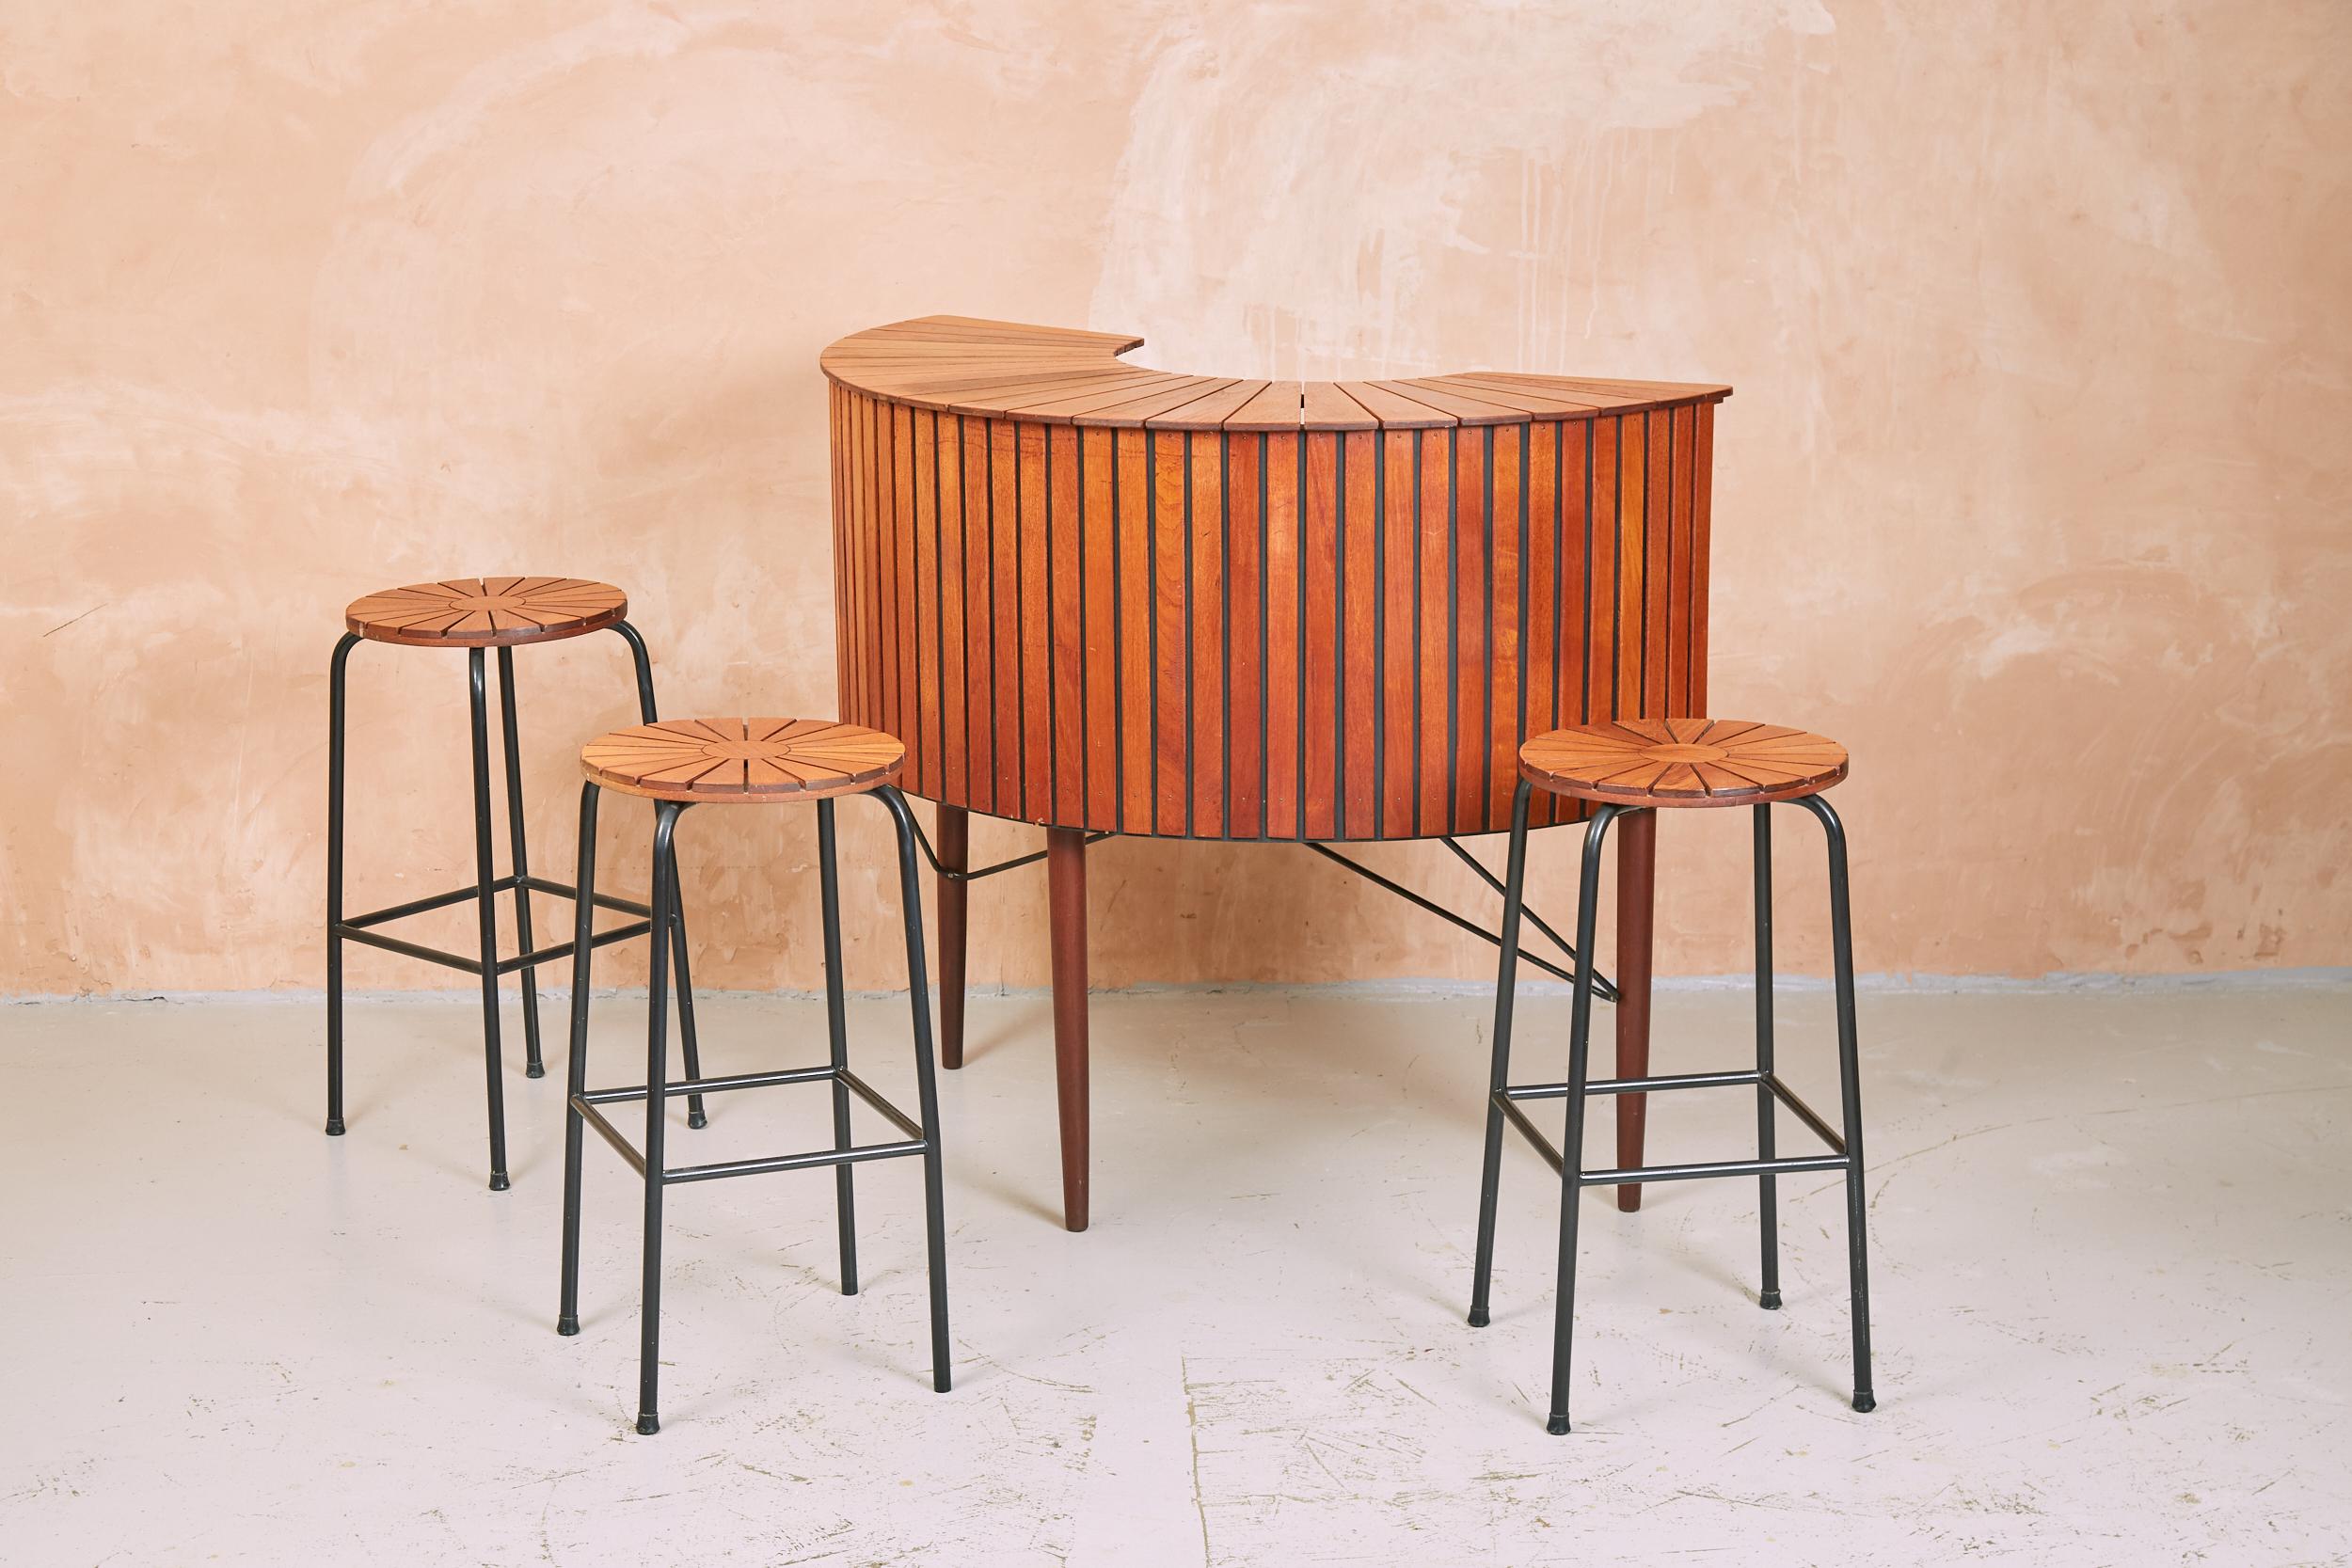 A rare and stylish 1960s home bar by Sika Møbler made in Denmark.
With a solid teak slatted bar, and matching stools in a sunburst pattern, this set is a real classic.
The demilune bar sits on solid teak legs, braced with black ironwork. There is